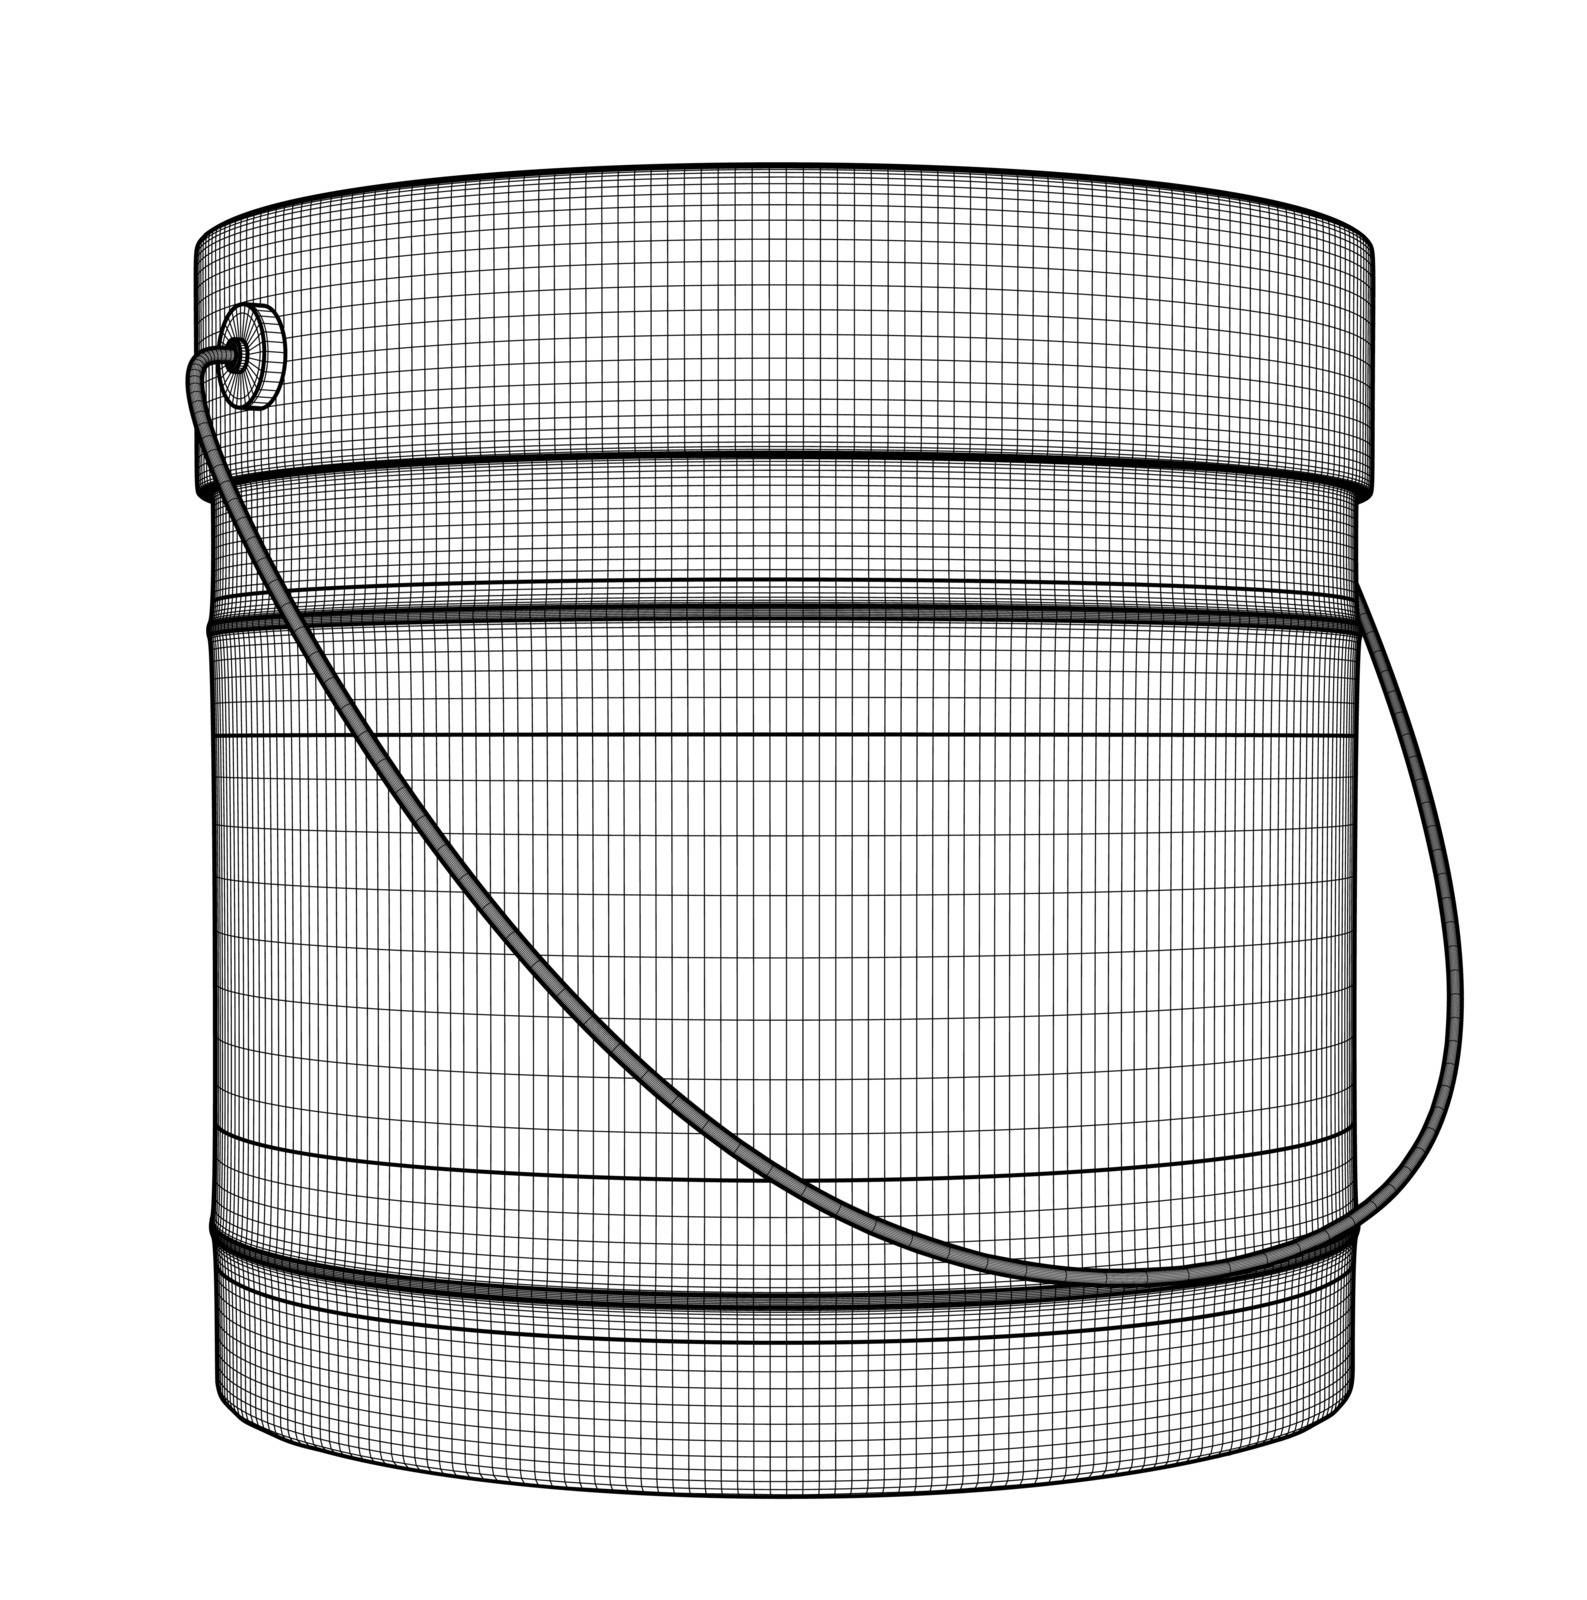 Closed tin can with color for wall painting. Black outline illustration on white background. Sketch.